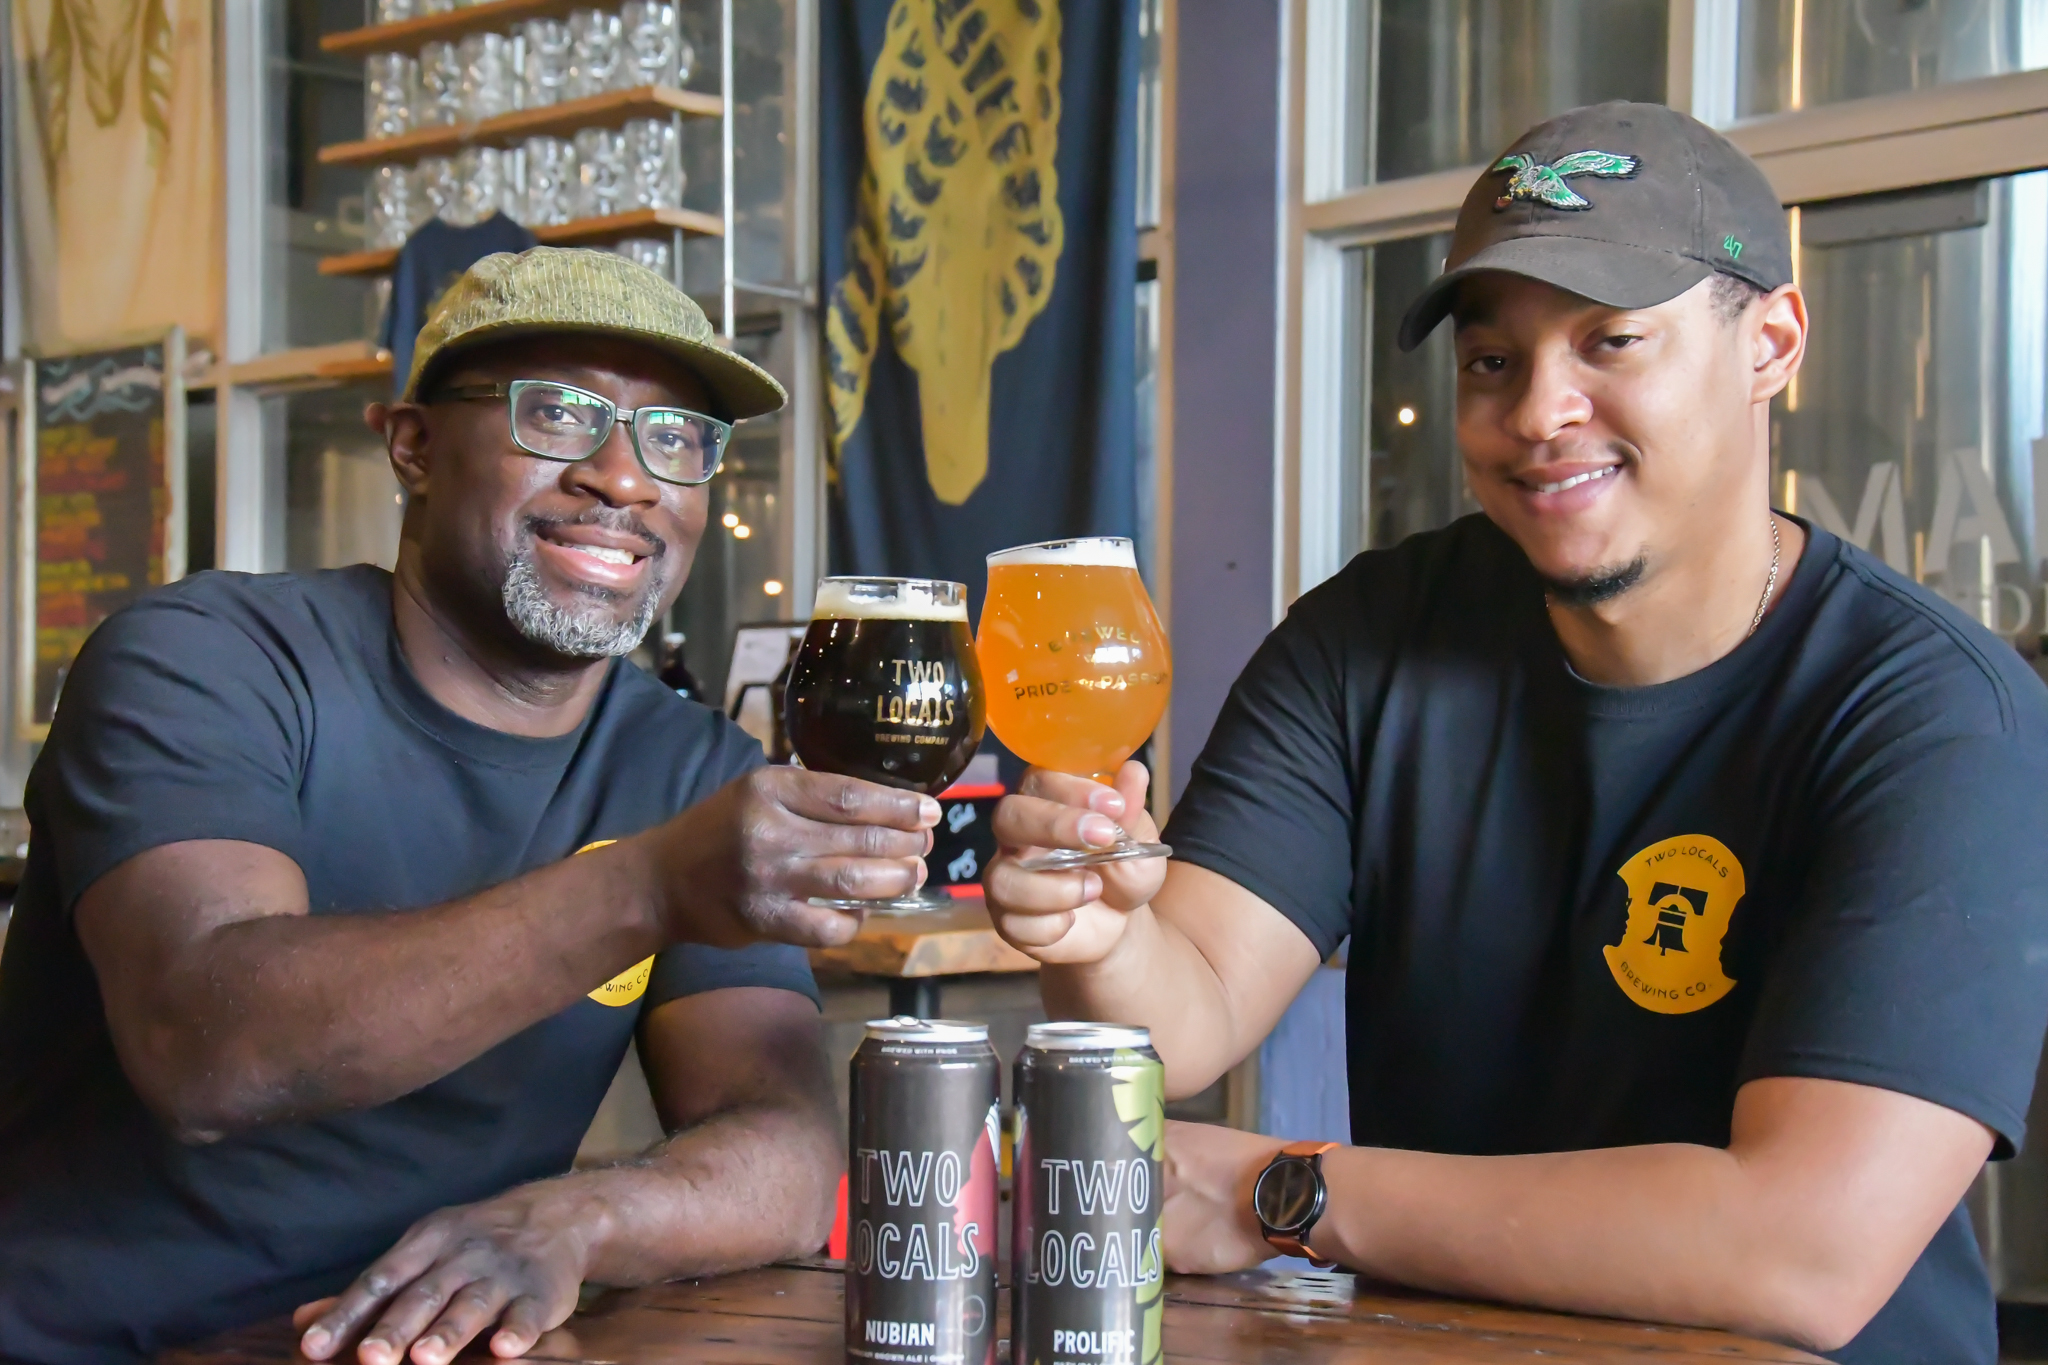 Carbon Copy To Open Fall 2022 In West Philadelphia - Breweries In PA